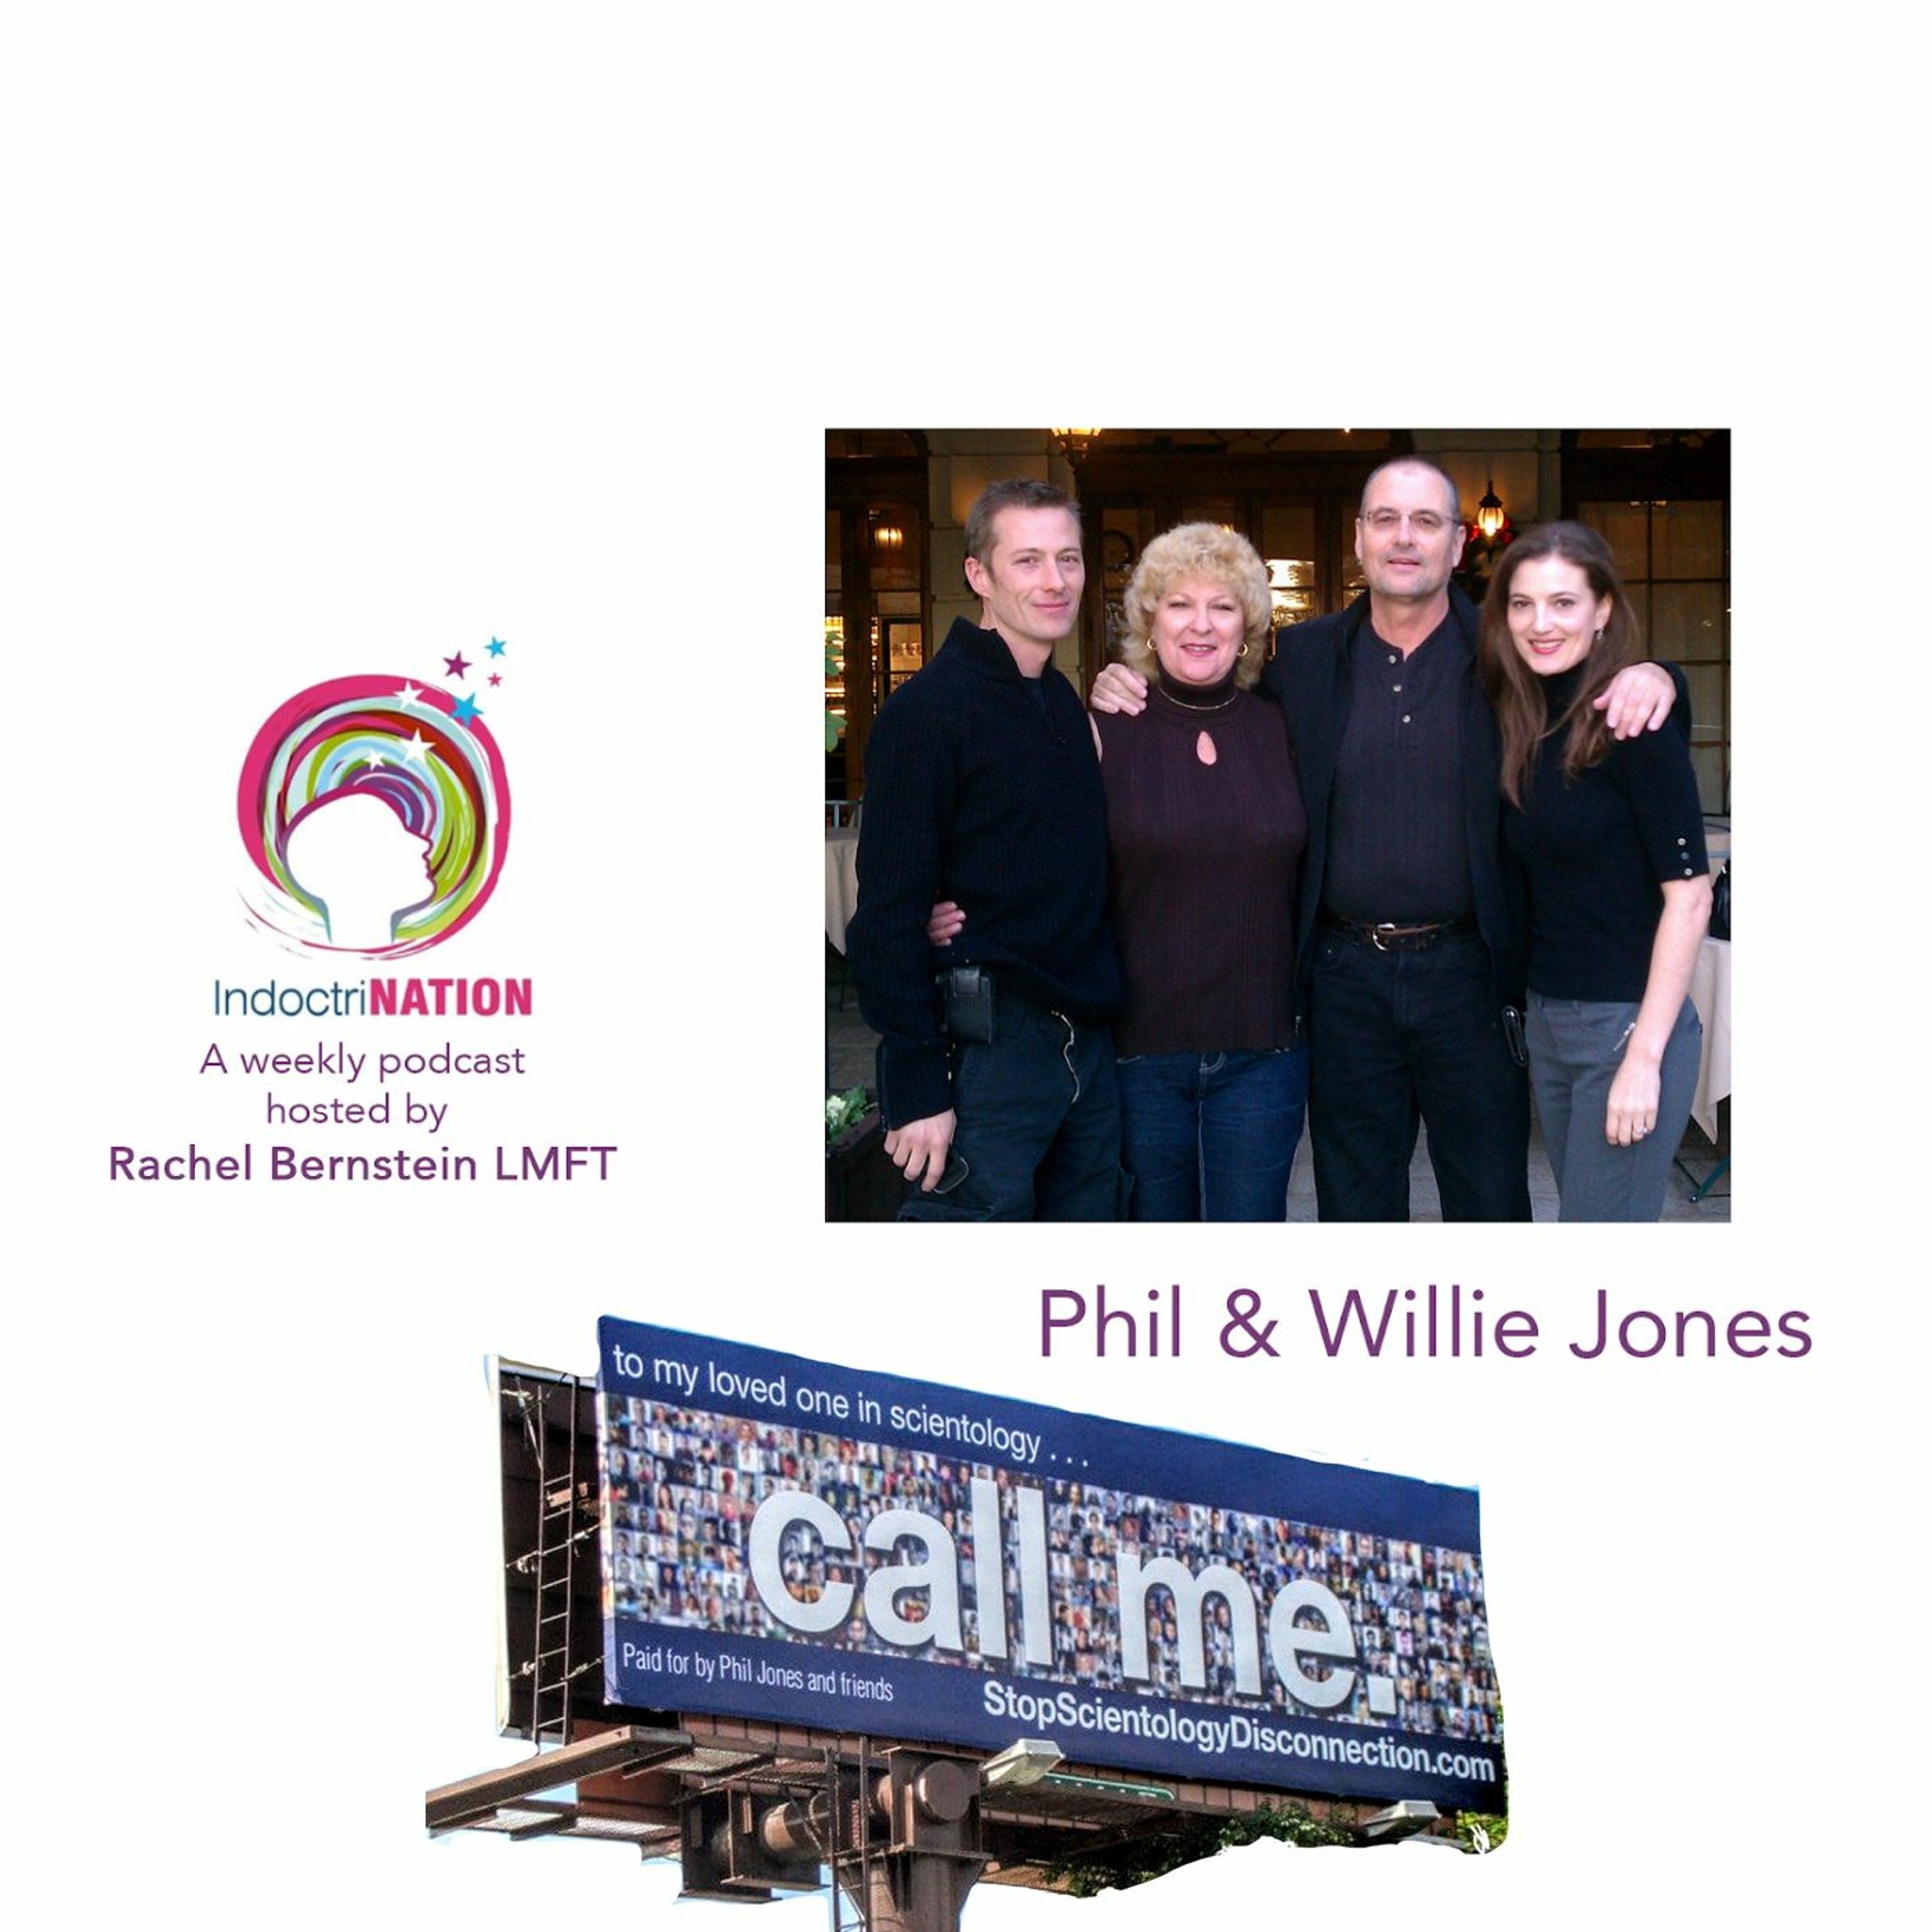 Faced Away From the Family - Phil & Willie Jones' Billboard, ex-Scientology - S3E9 Image